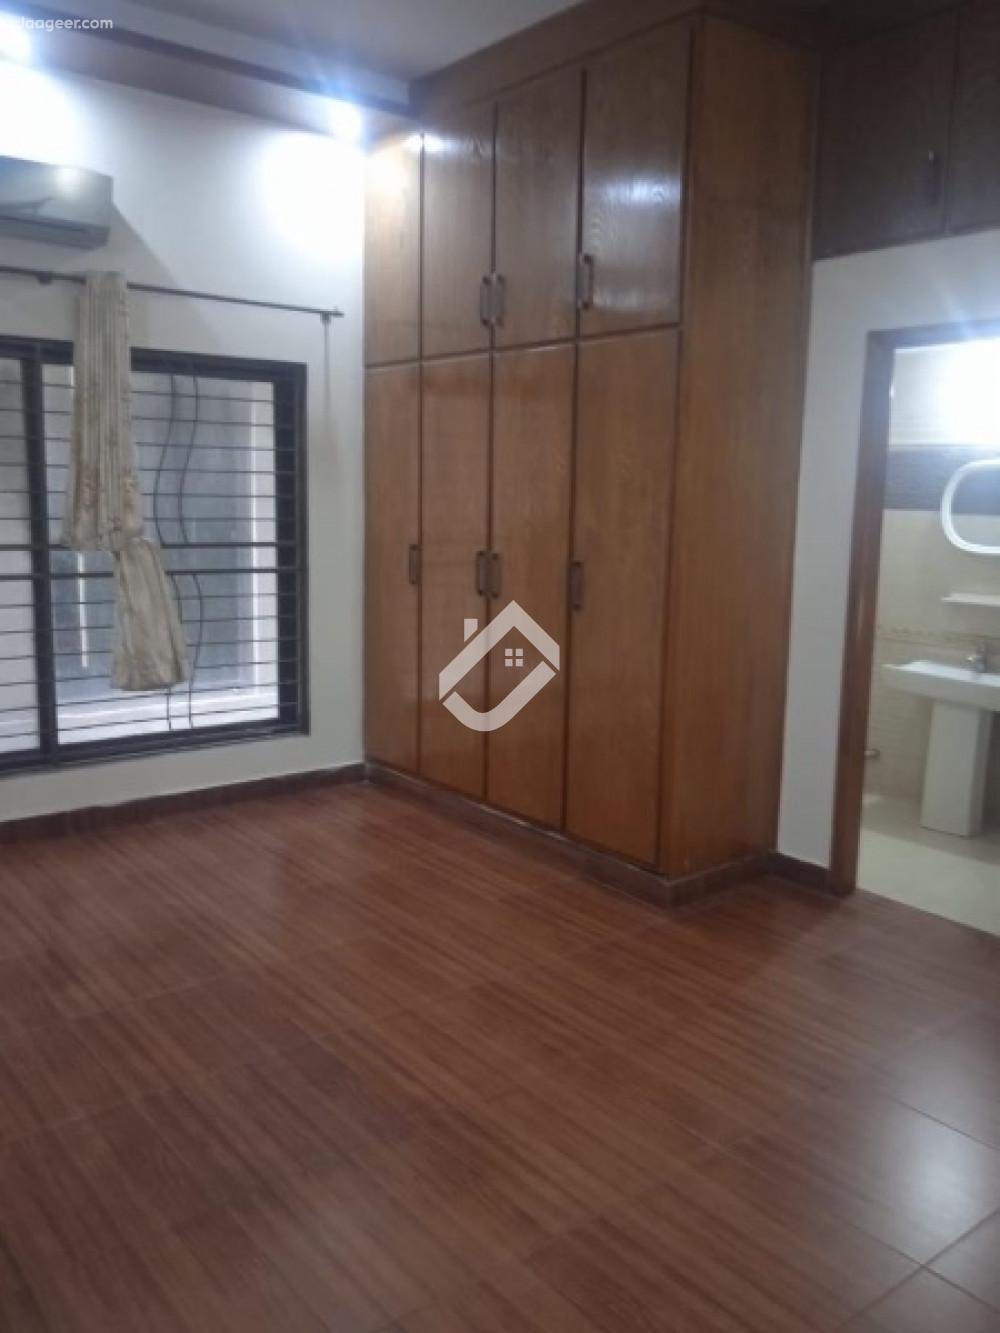 10 Marla Double Storey House For Rent In Airline Housing Society in Airline Housing Society Lahore, Lahore